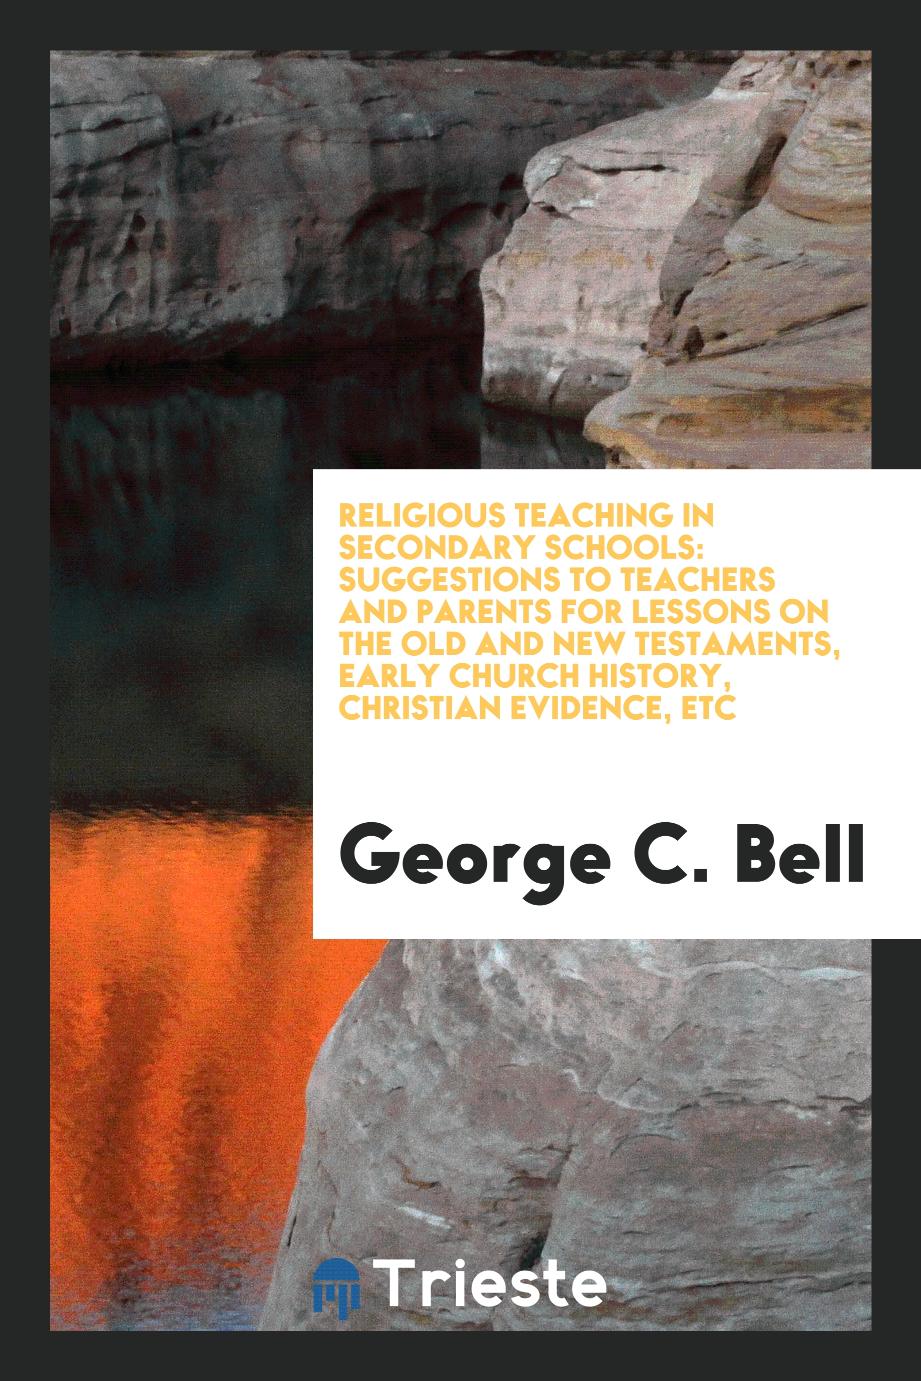 Religious teaching in secondary schools: suggestions to teachers and parents for lessons on the Old and New Testaments, early church history, Christian evidence, etc